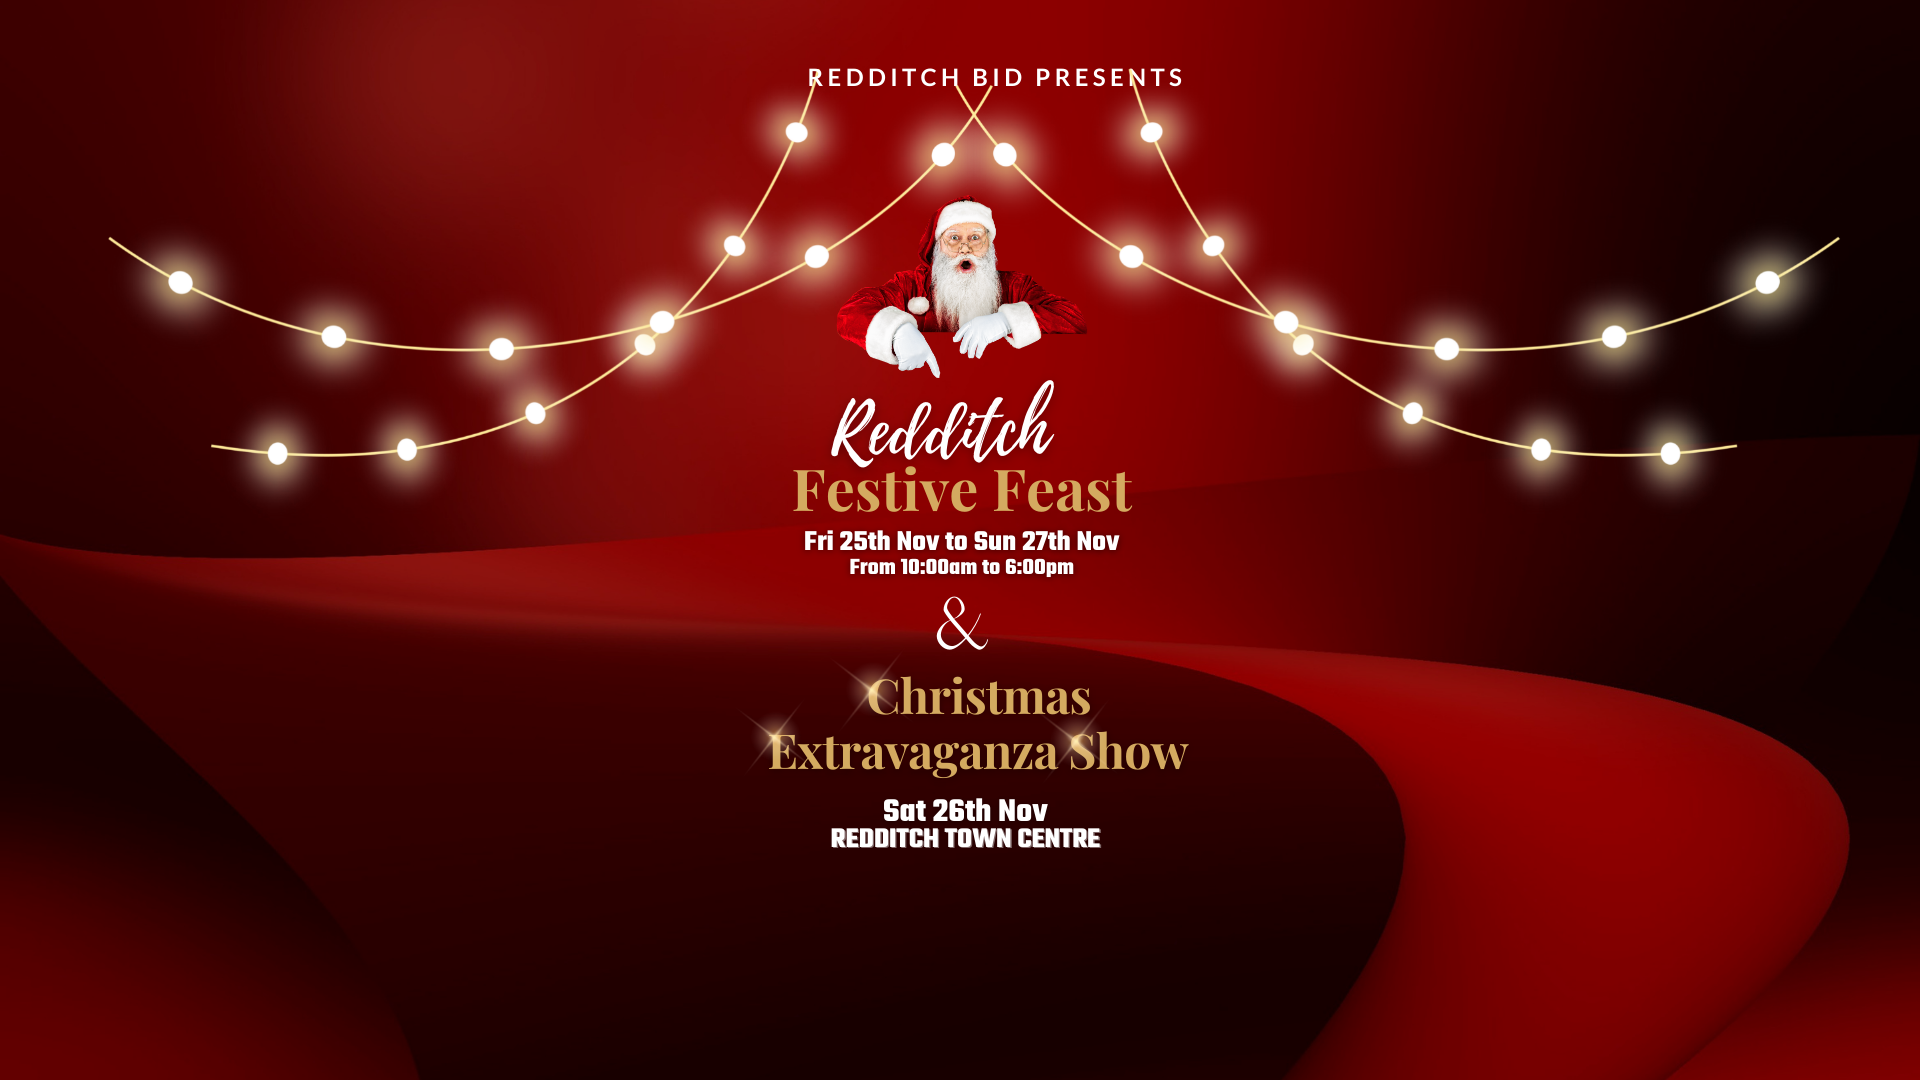 Redditch Festive Feast and Christmas Extravaganza Show returns to Redditch this November.